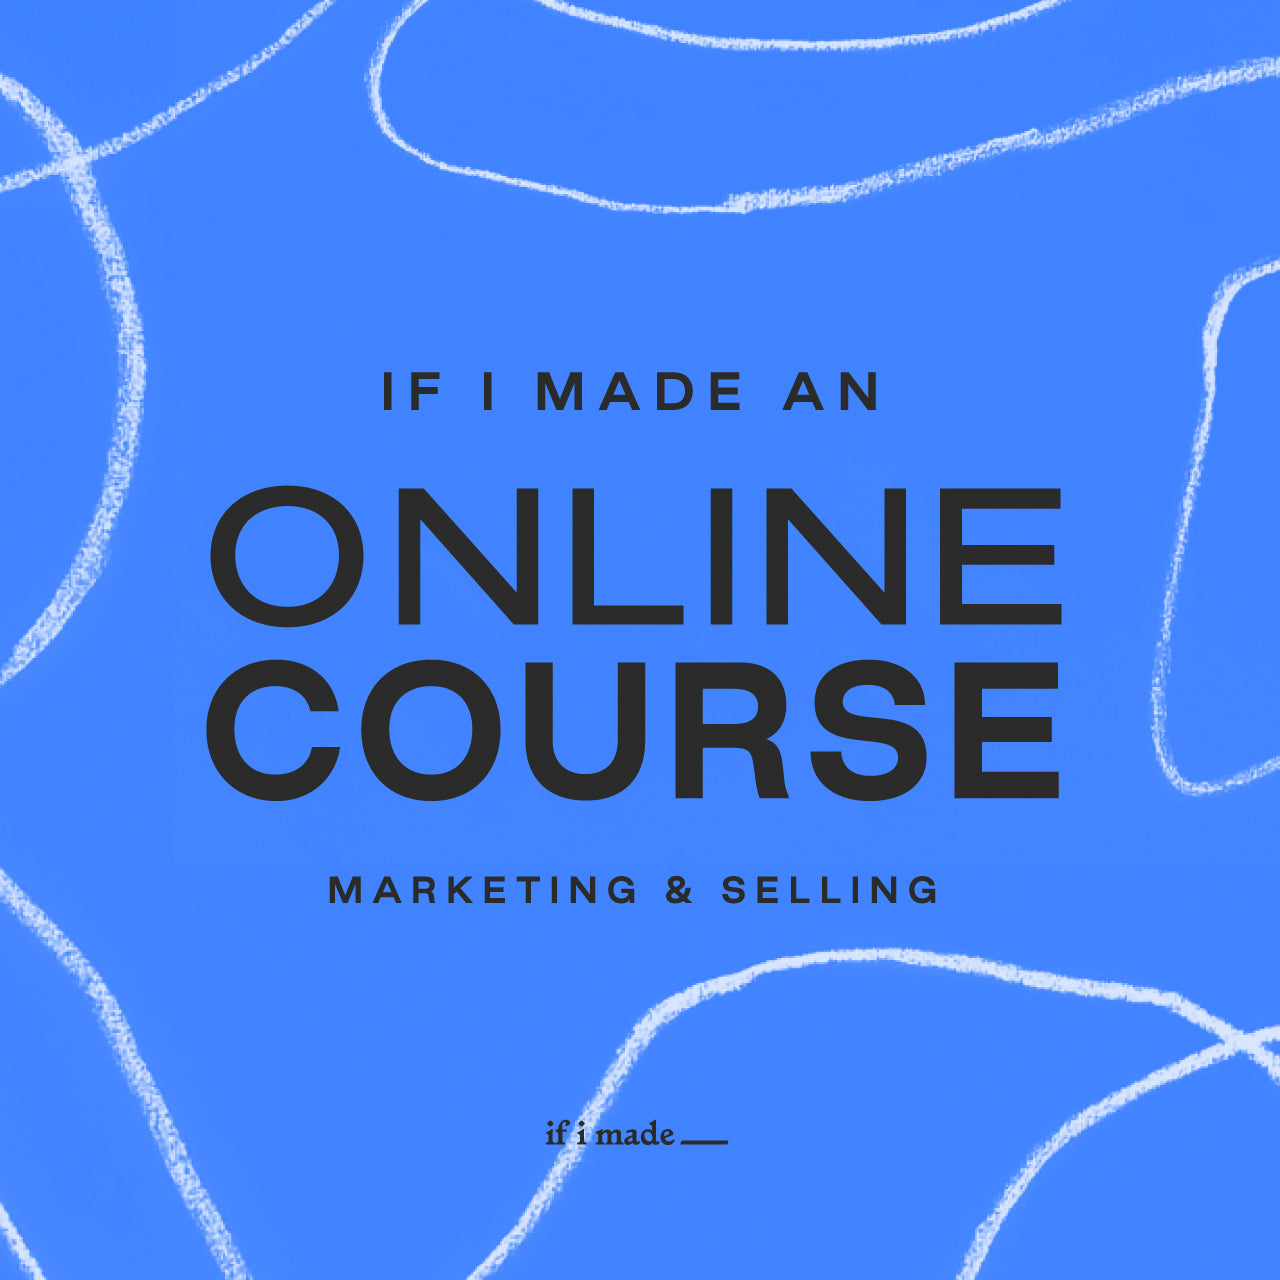 Marketing & Selling an Online Course (RPP) - 13 Payments of $99